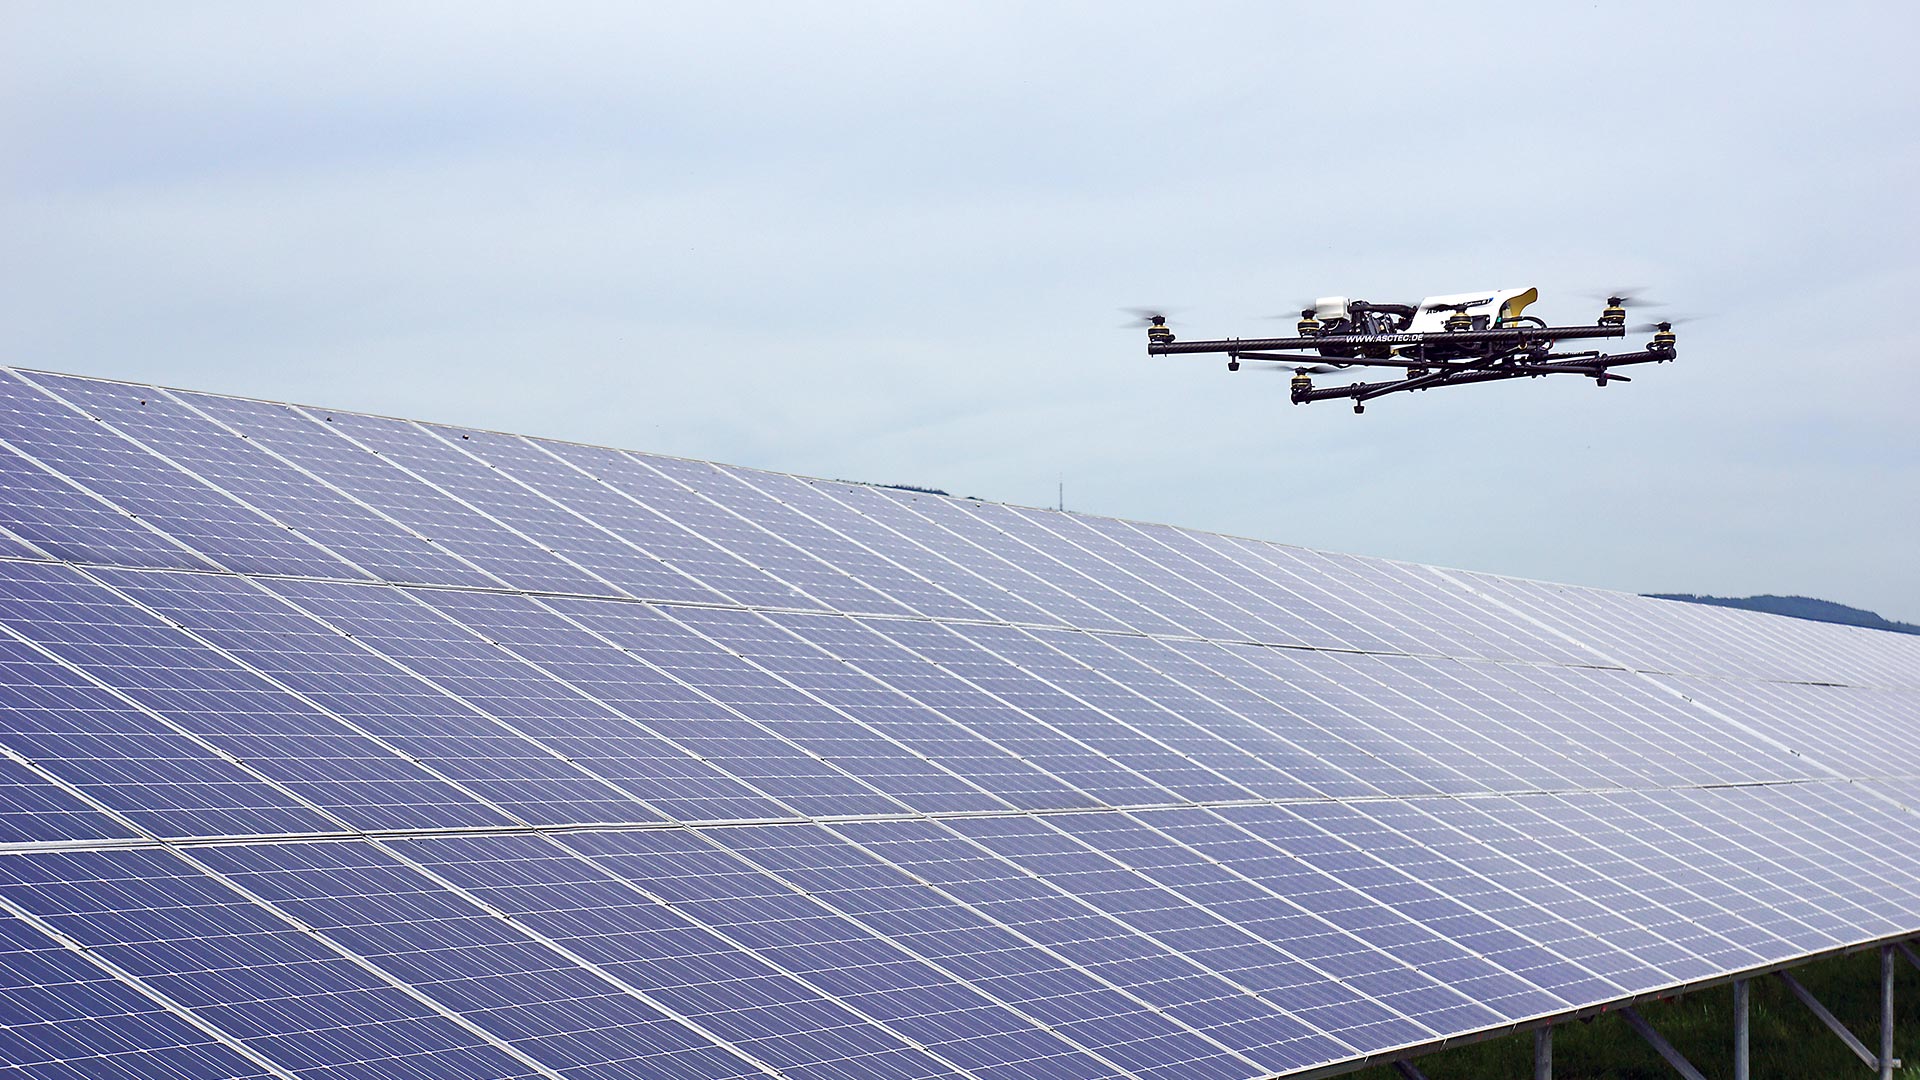 AscTec-falcon-8-inspection-safe-high-tech-drone-automation-thermal-solar-plant-photovoltaic.jpg